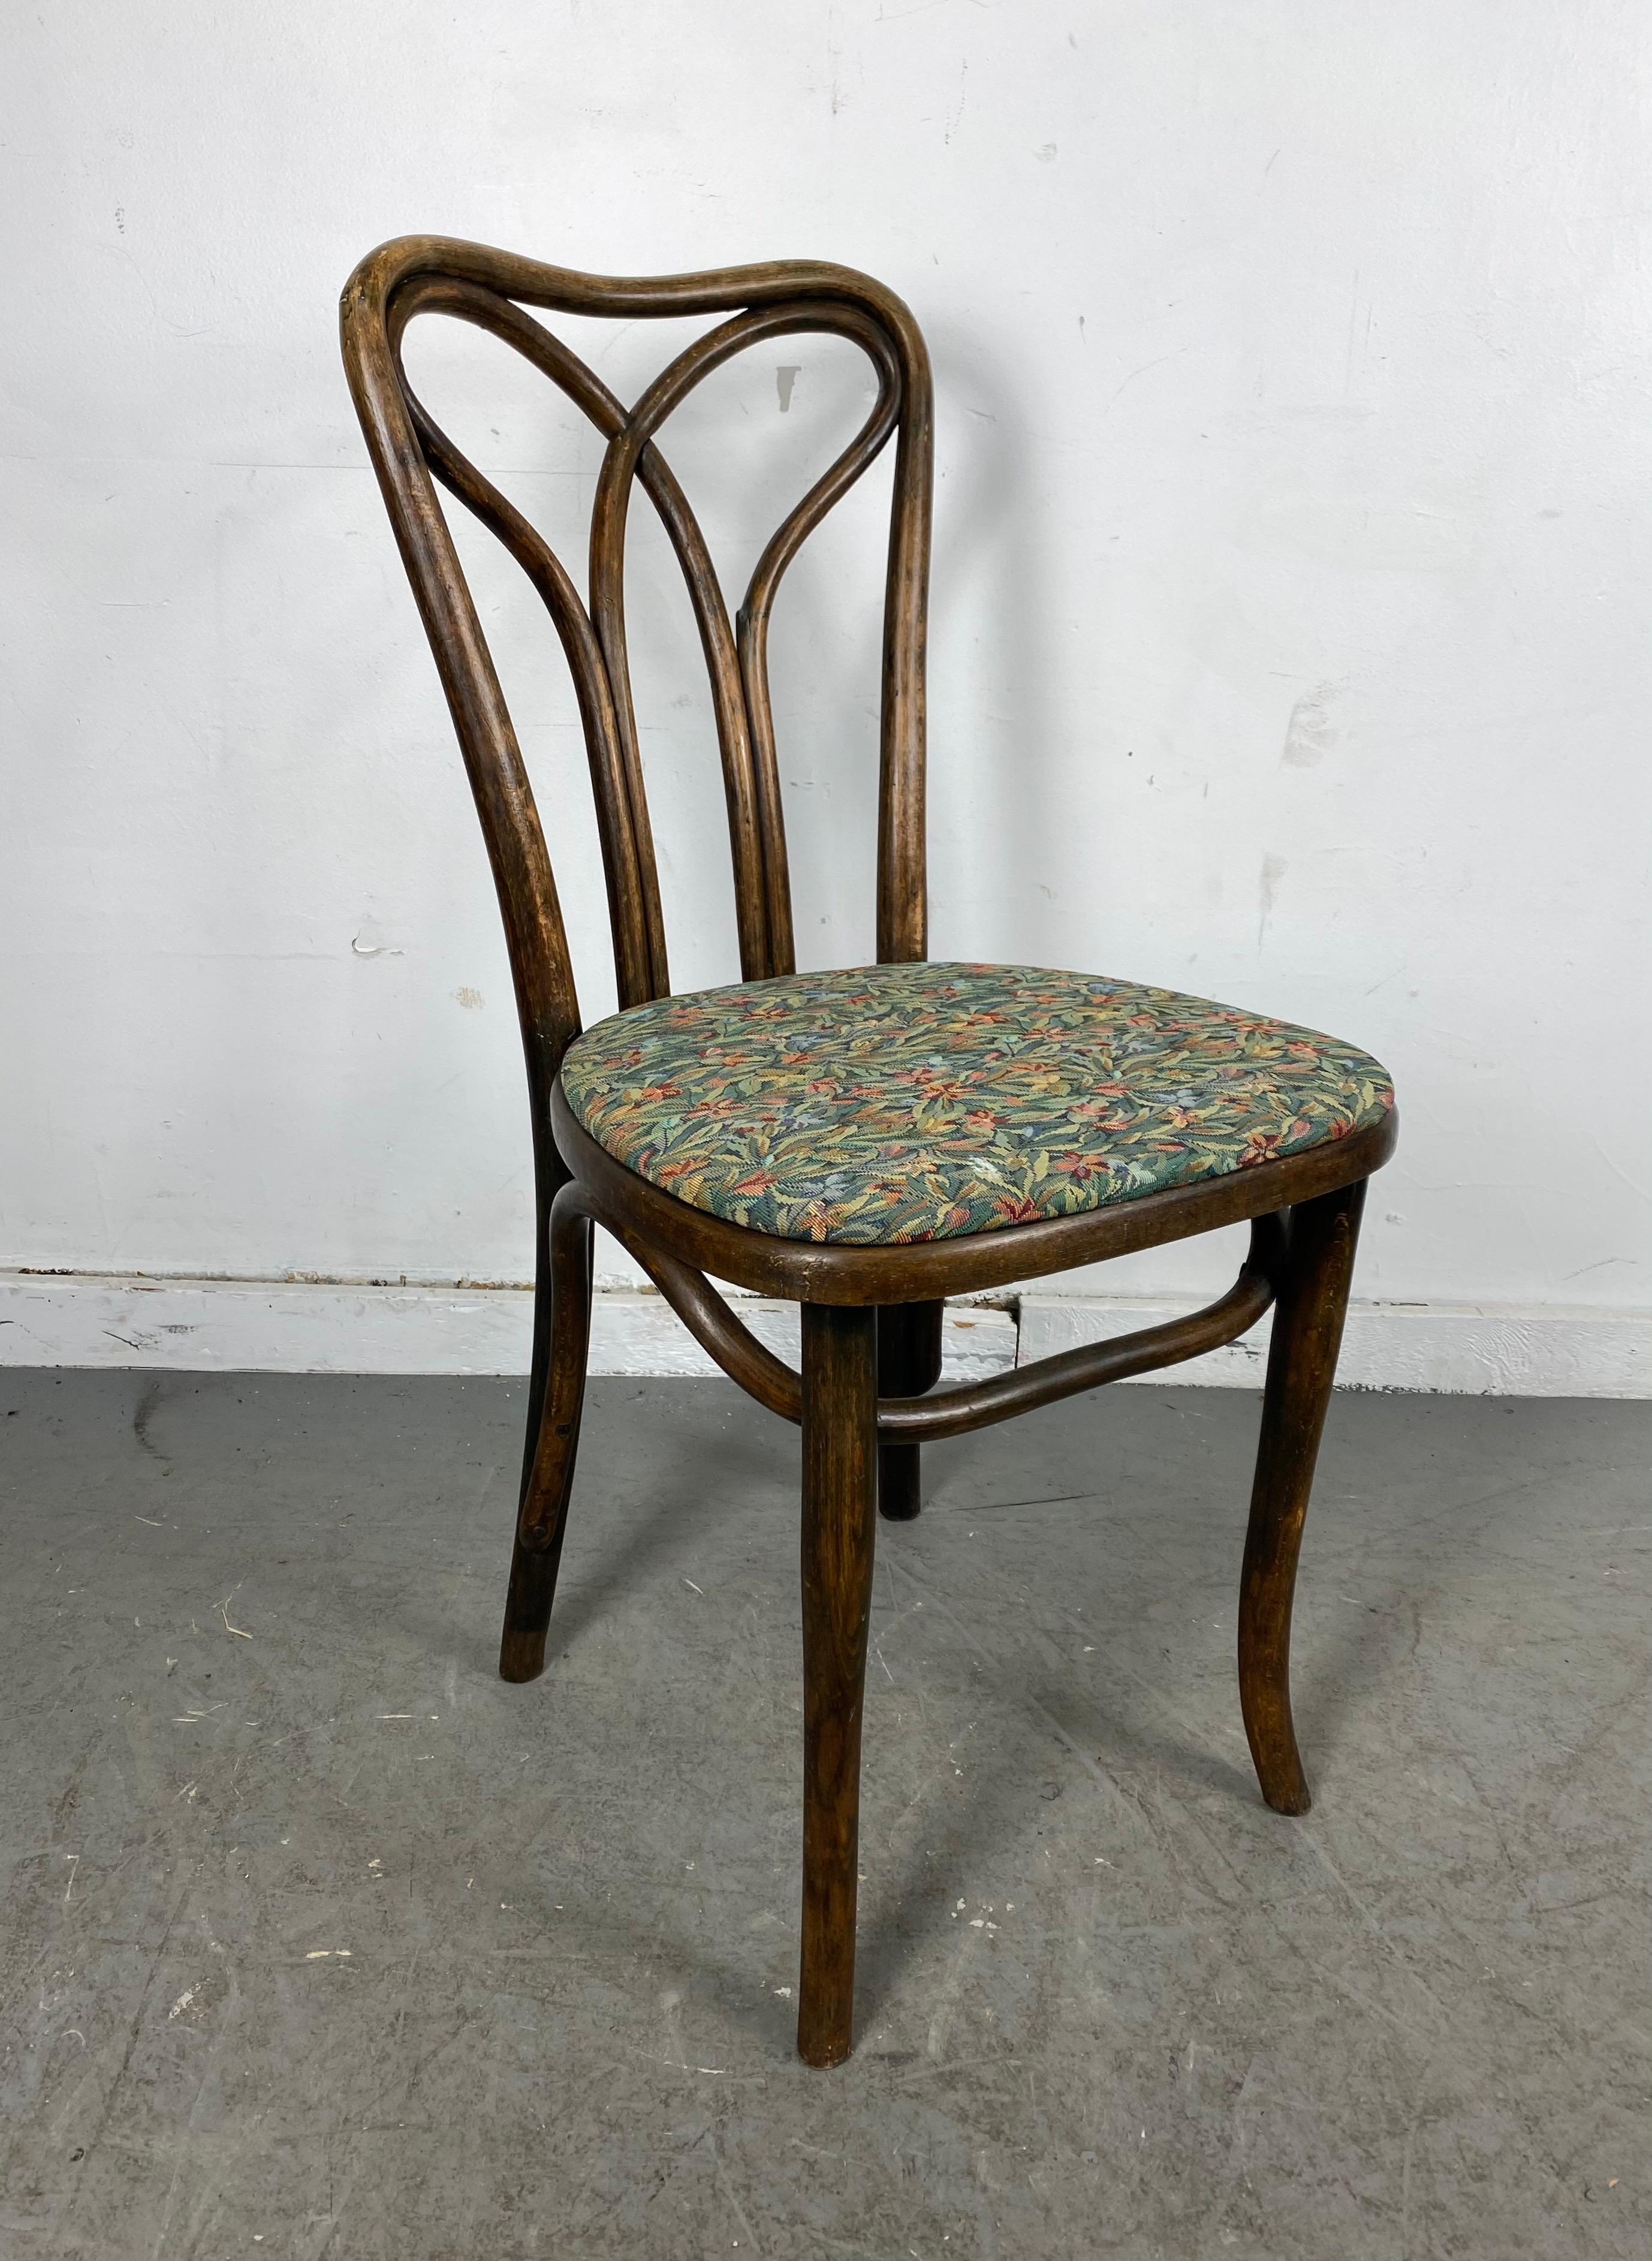 Austrian Art Nouveau Bentwood Side Chair Attributed to J & J Kohn, Early 1900's For Sale 2